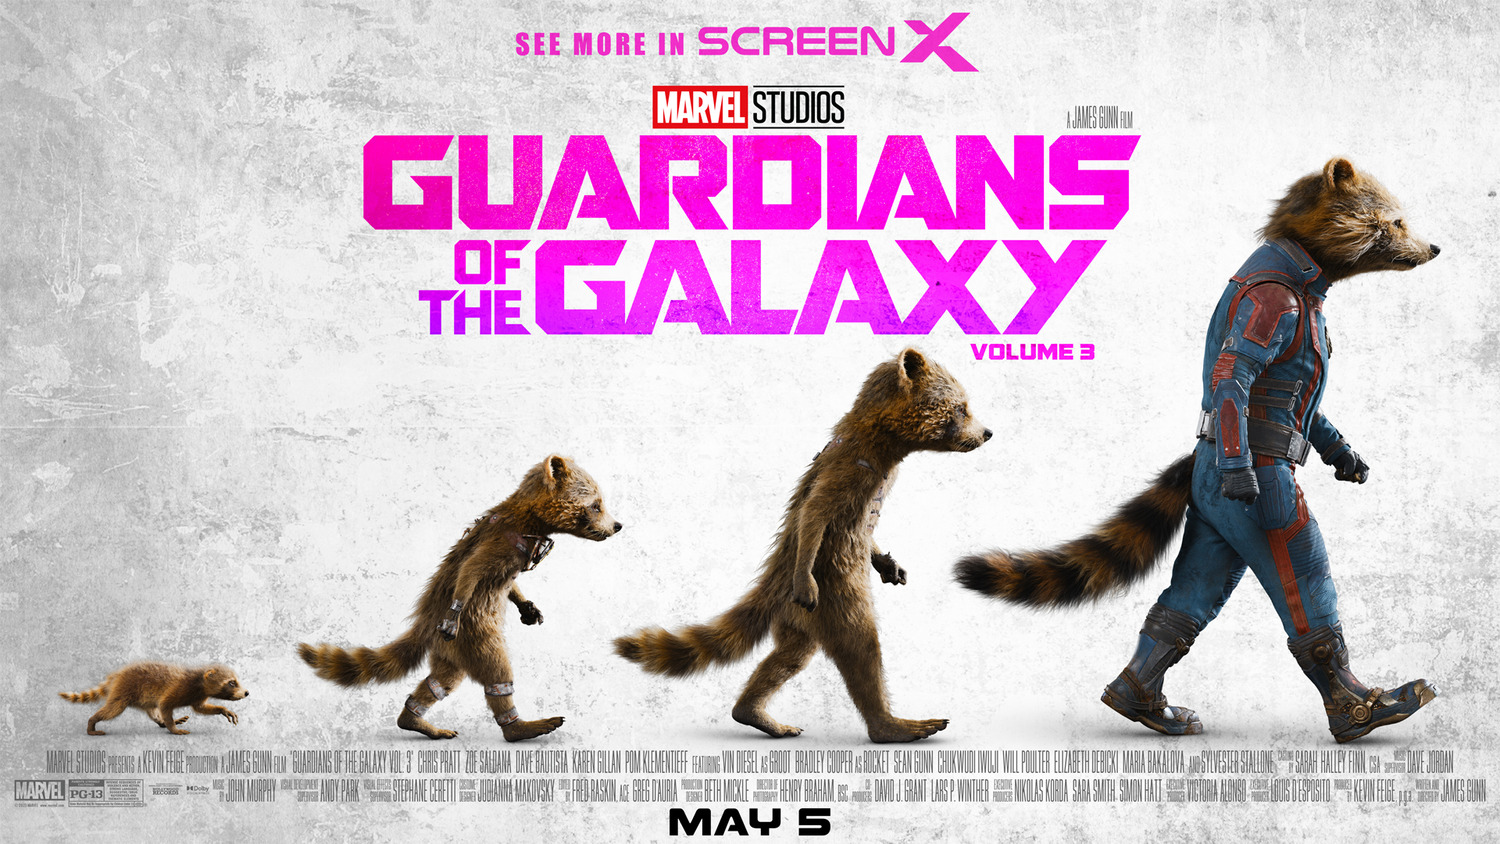 Extra Large Movie Poster Image for Guardians of the Galaxy Vol. 3 (#5 of 20)